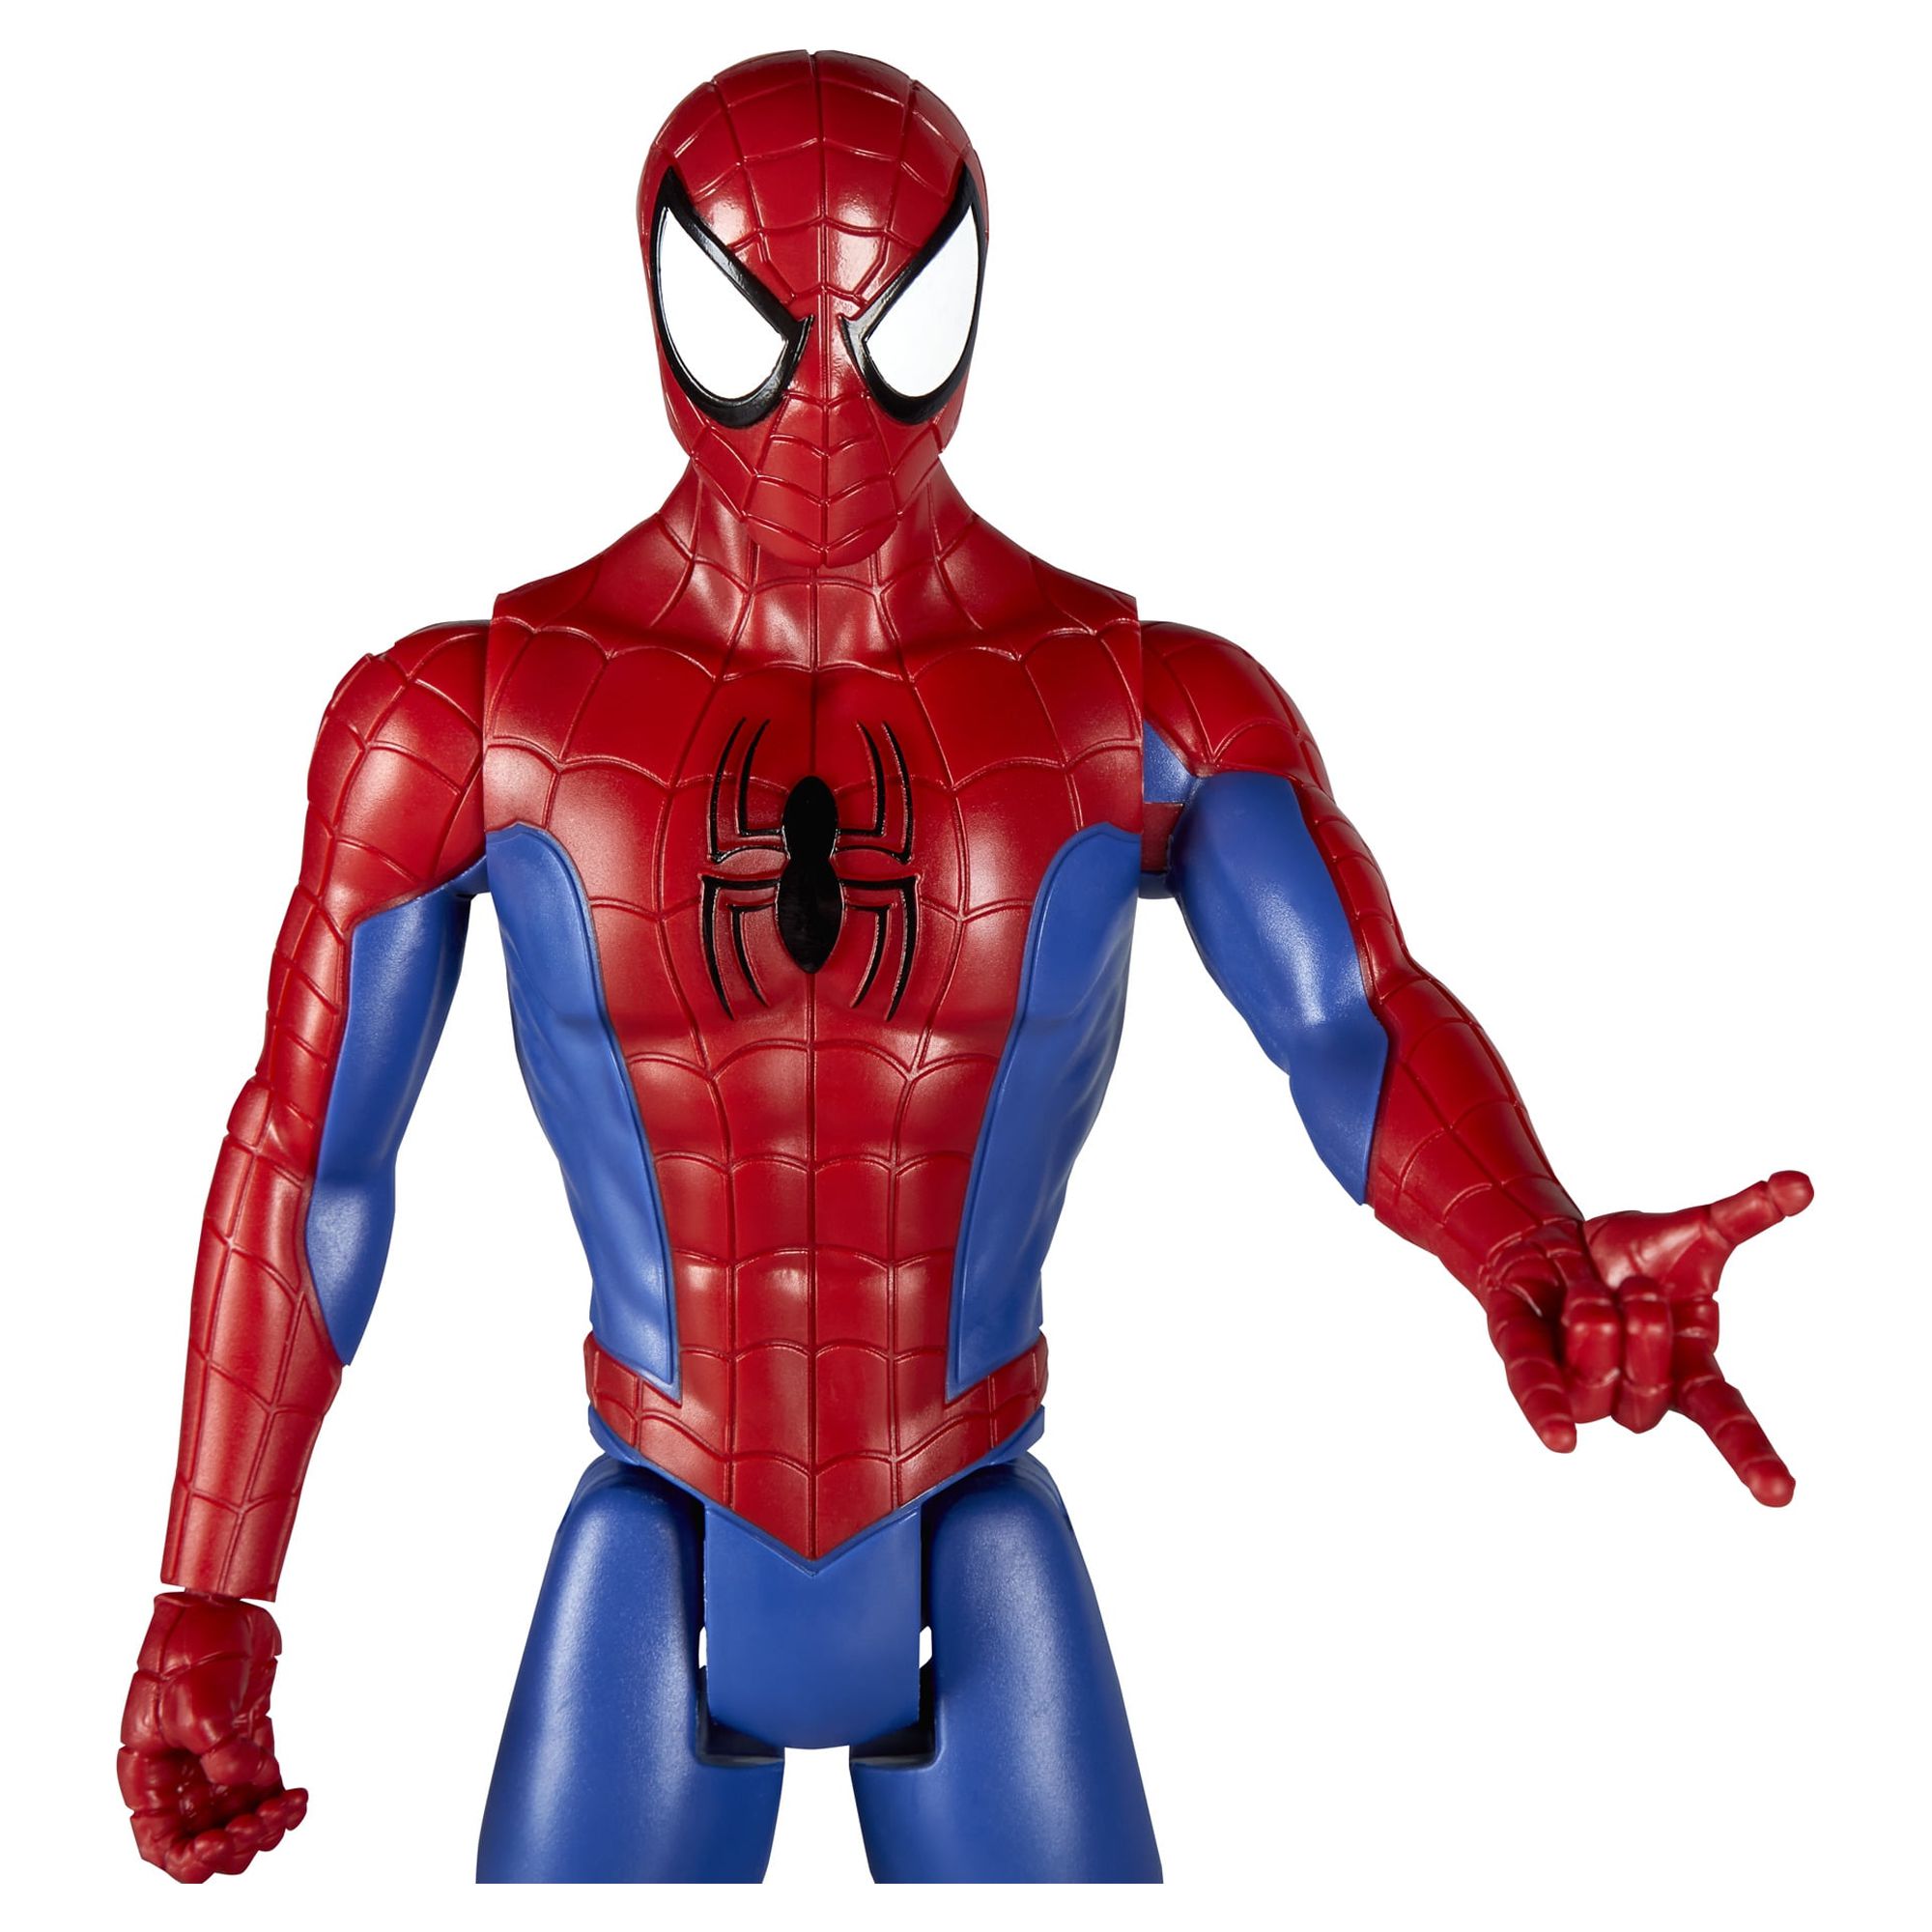 Marvel Spiderman: Titan Hero Series Spiderman Kids Toy Action Figure for Boys and Girls (13”) - image 5 of 16